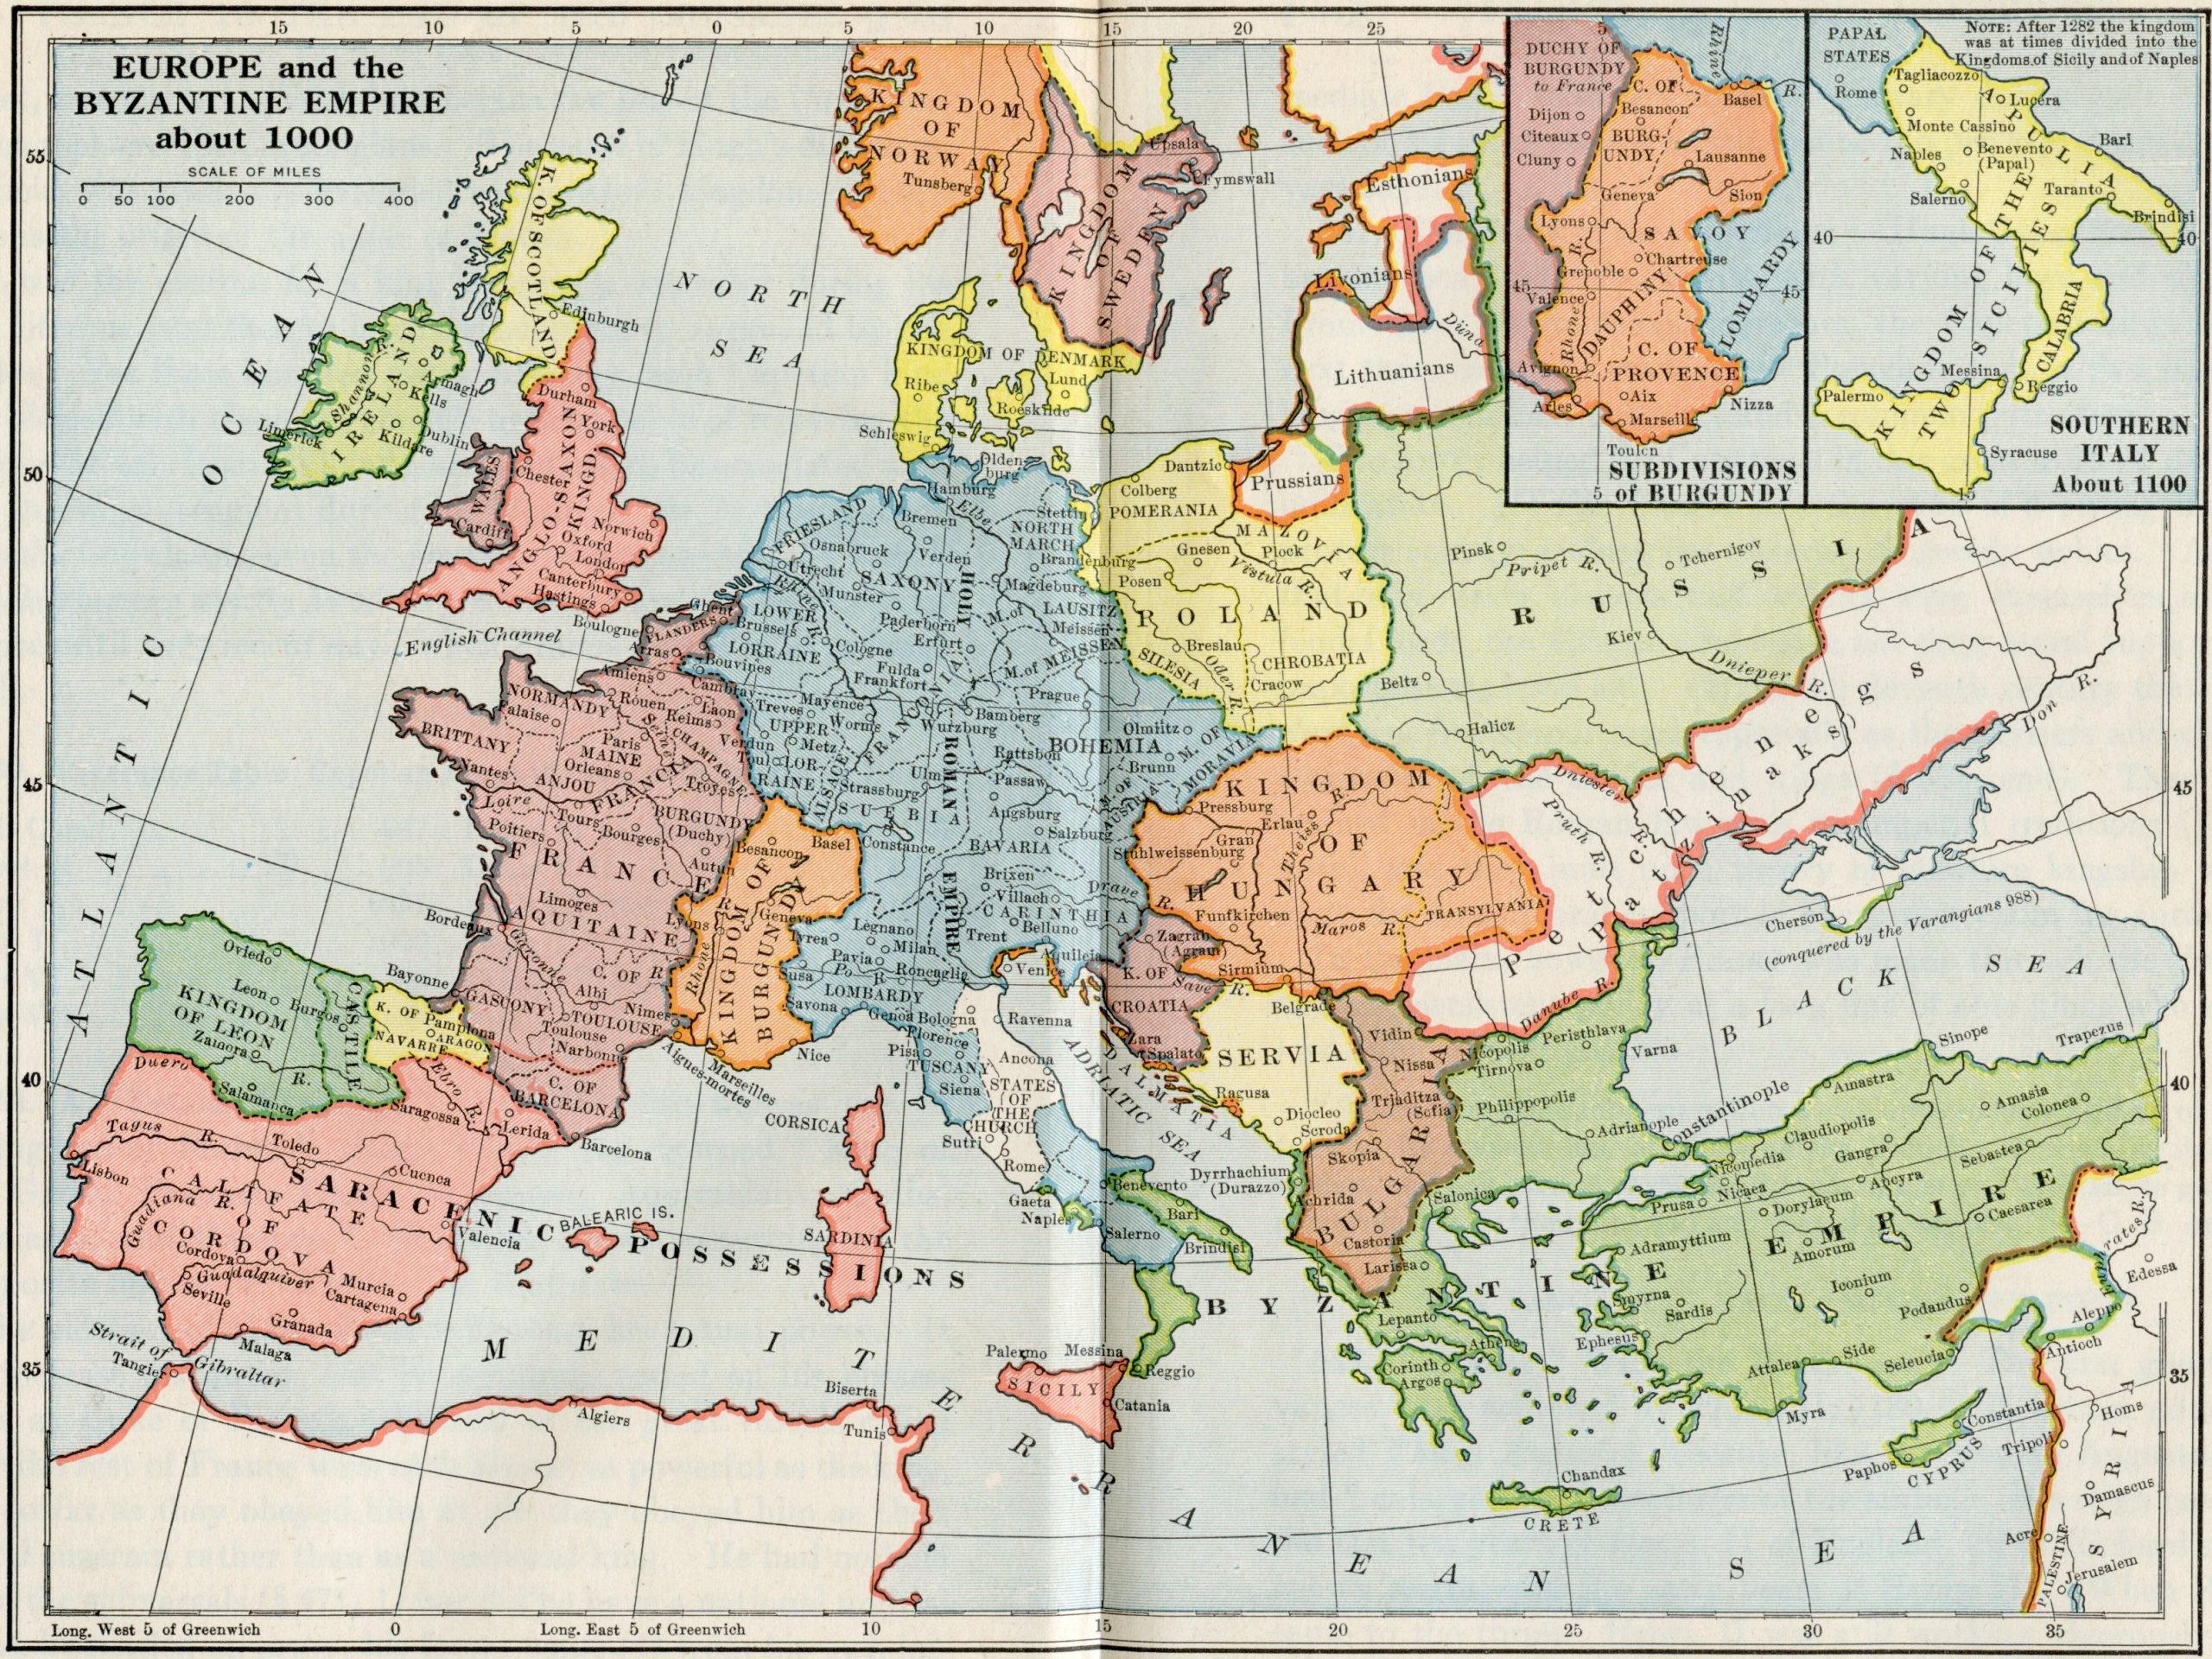 Europe and the Byzantine Empire about 1000